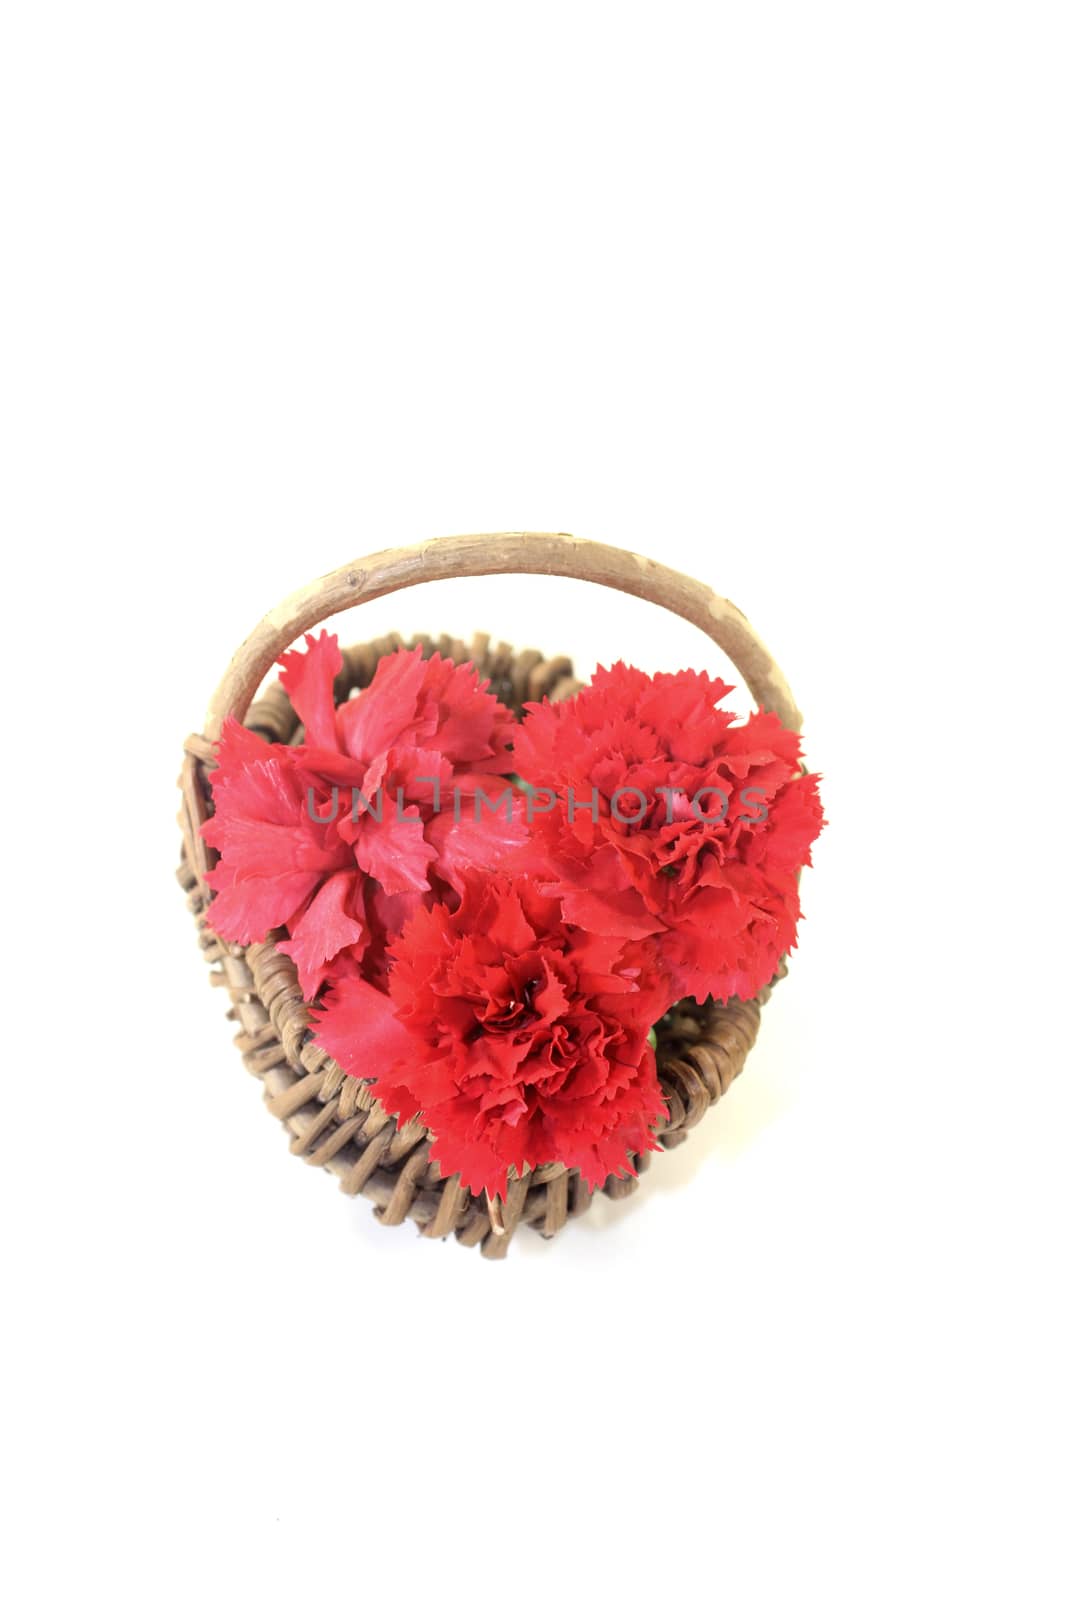 red carnations blossoms in a basket by discovery